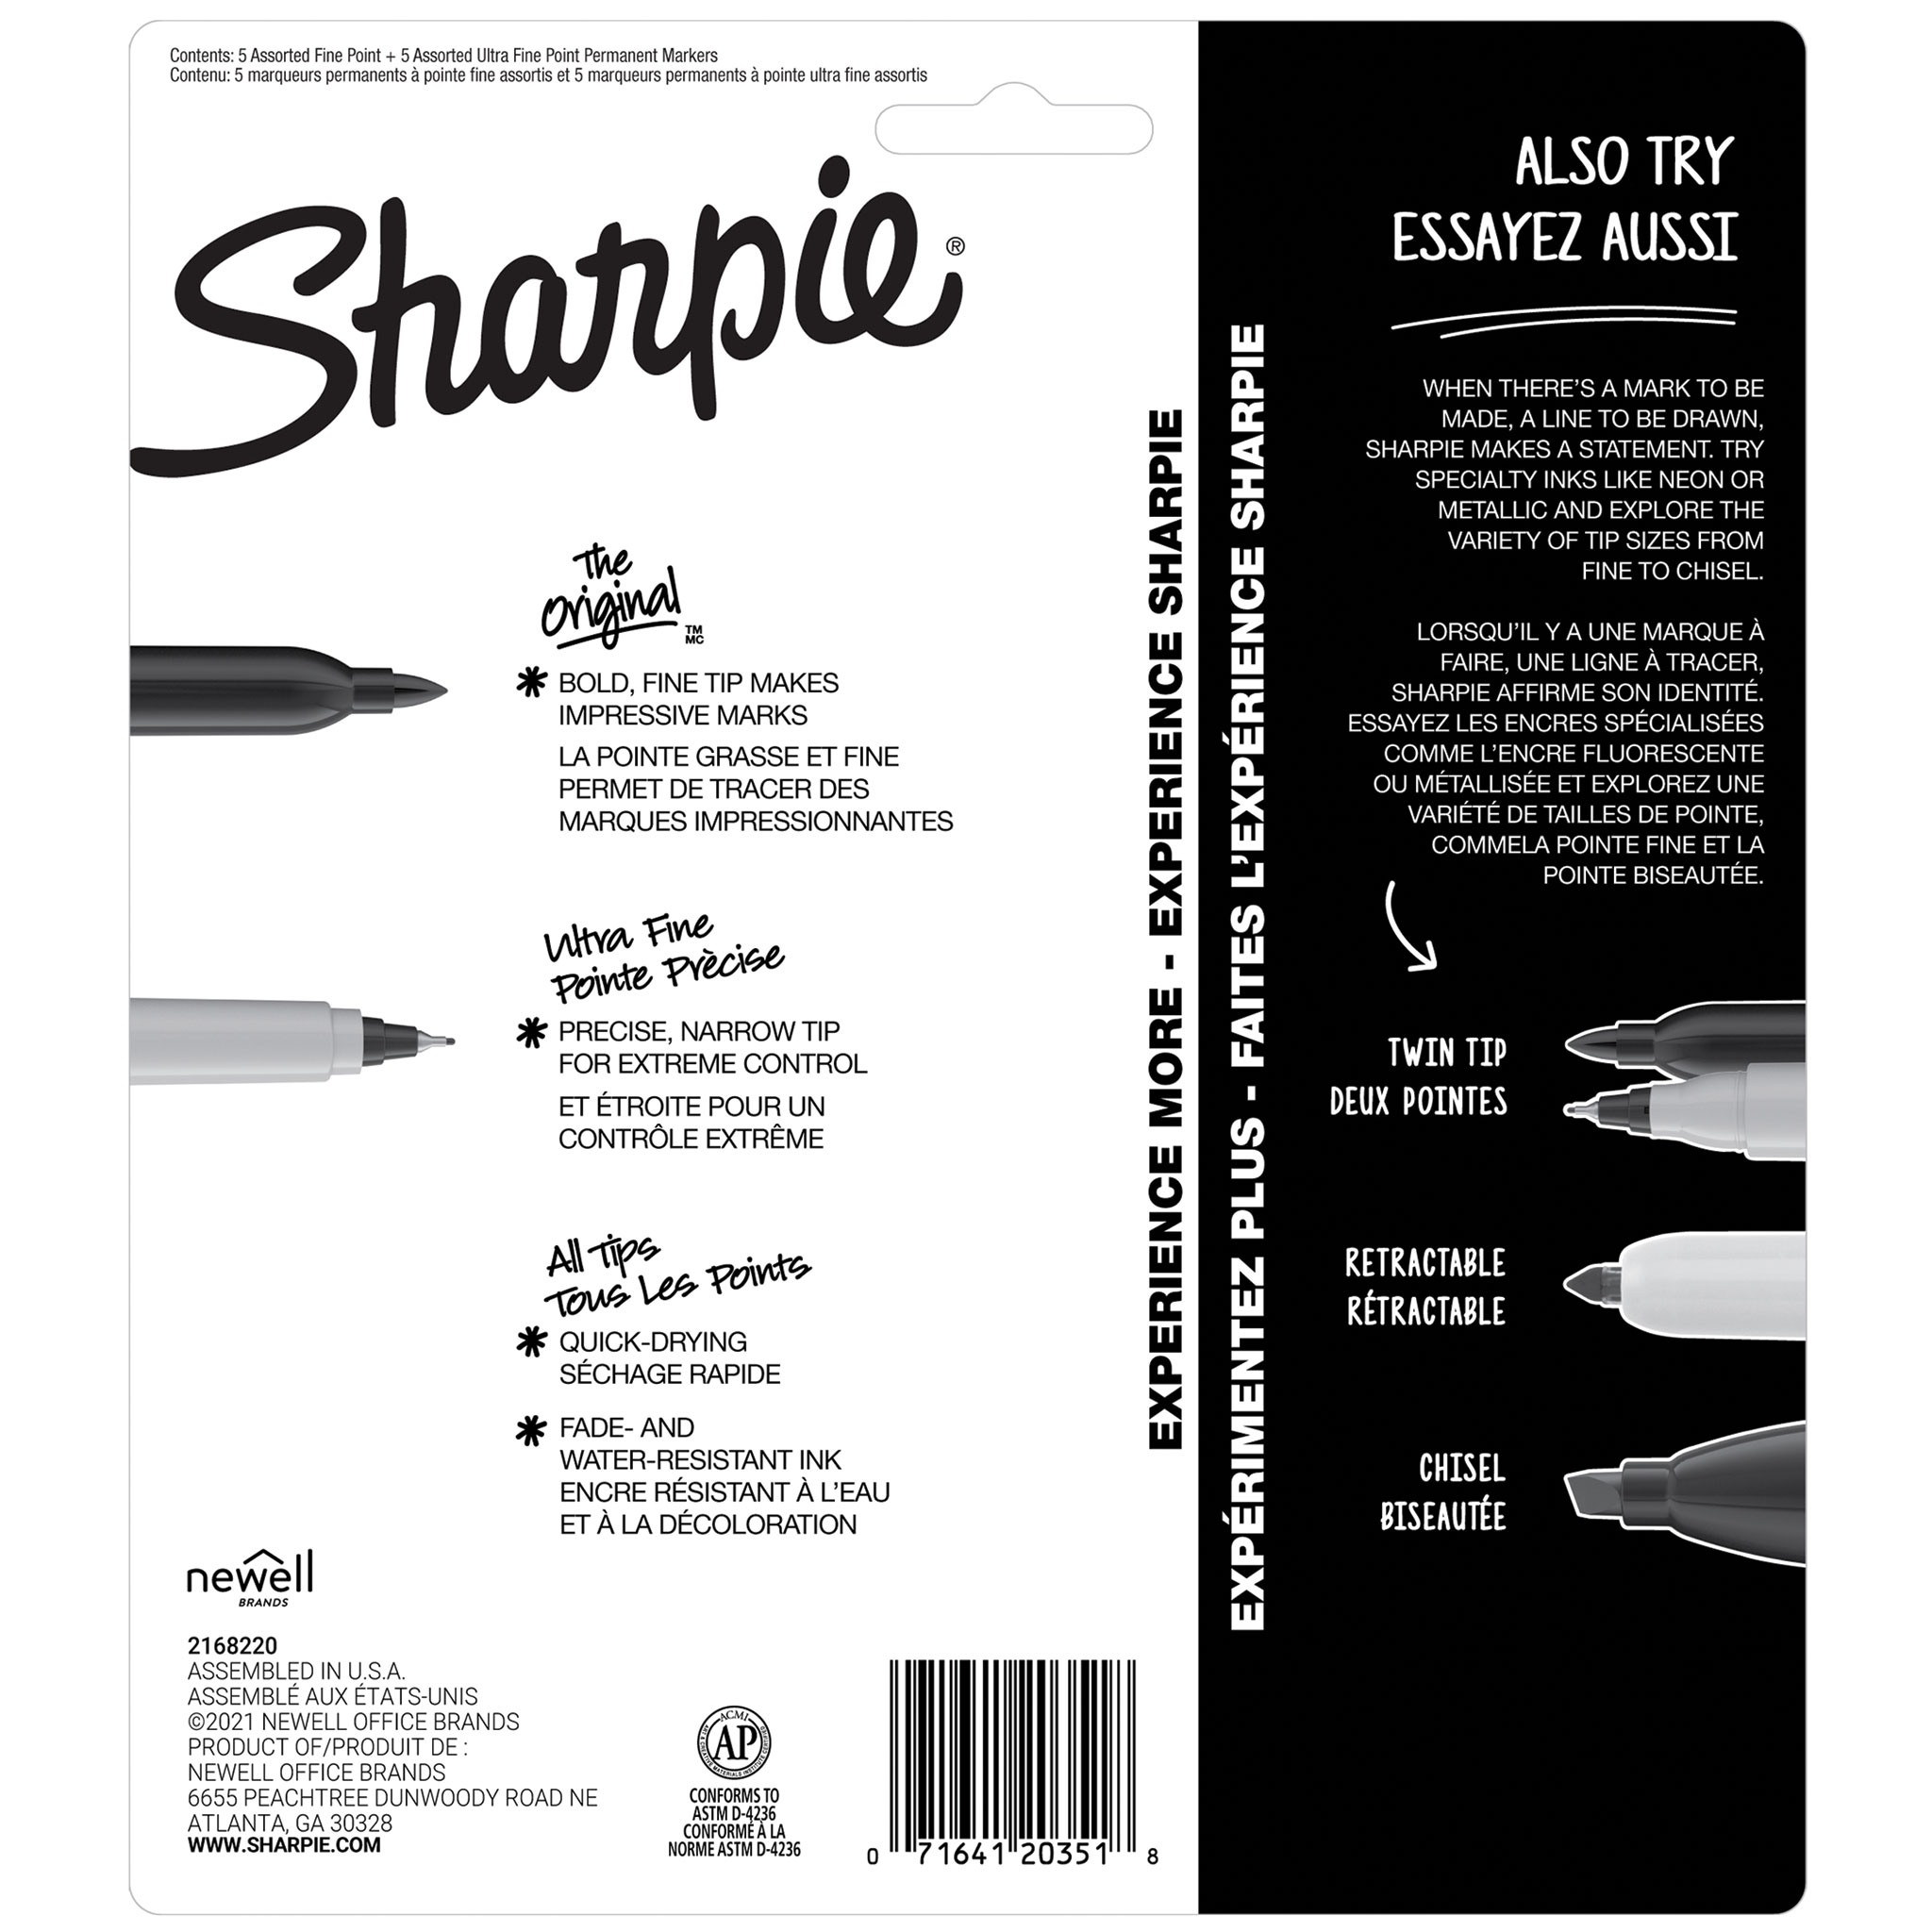 Sharpie Permanent Markers Fine and Ultra-Fine Variety Pack - Set of 10